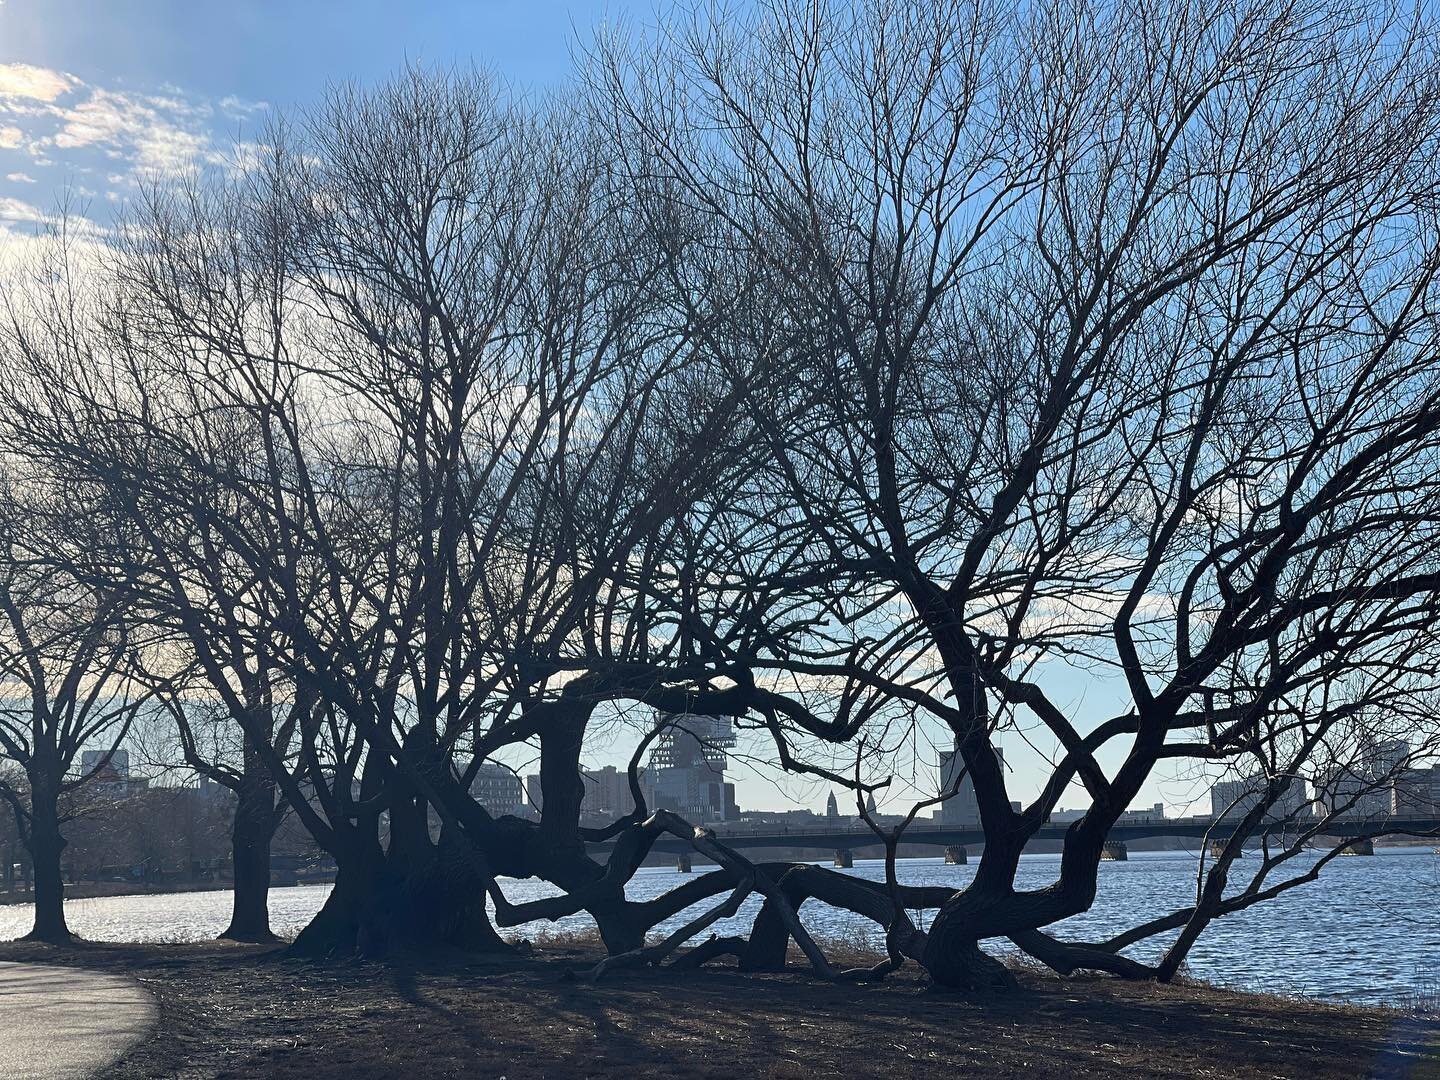 My 2 and a half hour walk in freezing cold found me contemplating this beauty. One of my favorite trees at the esplanade island right by the river&rsquo;s edge. This sprawling tree epitomizes what I want to convey: Strong and grounded limbs; light an